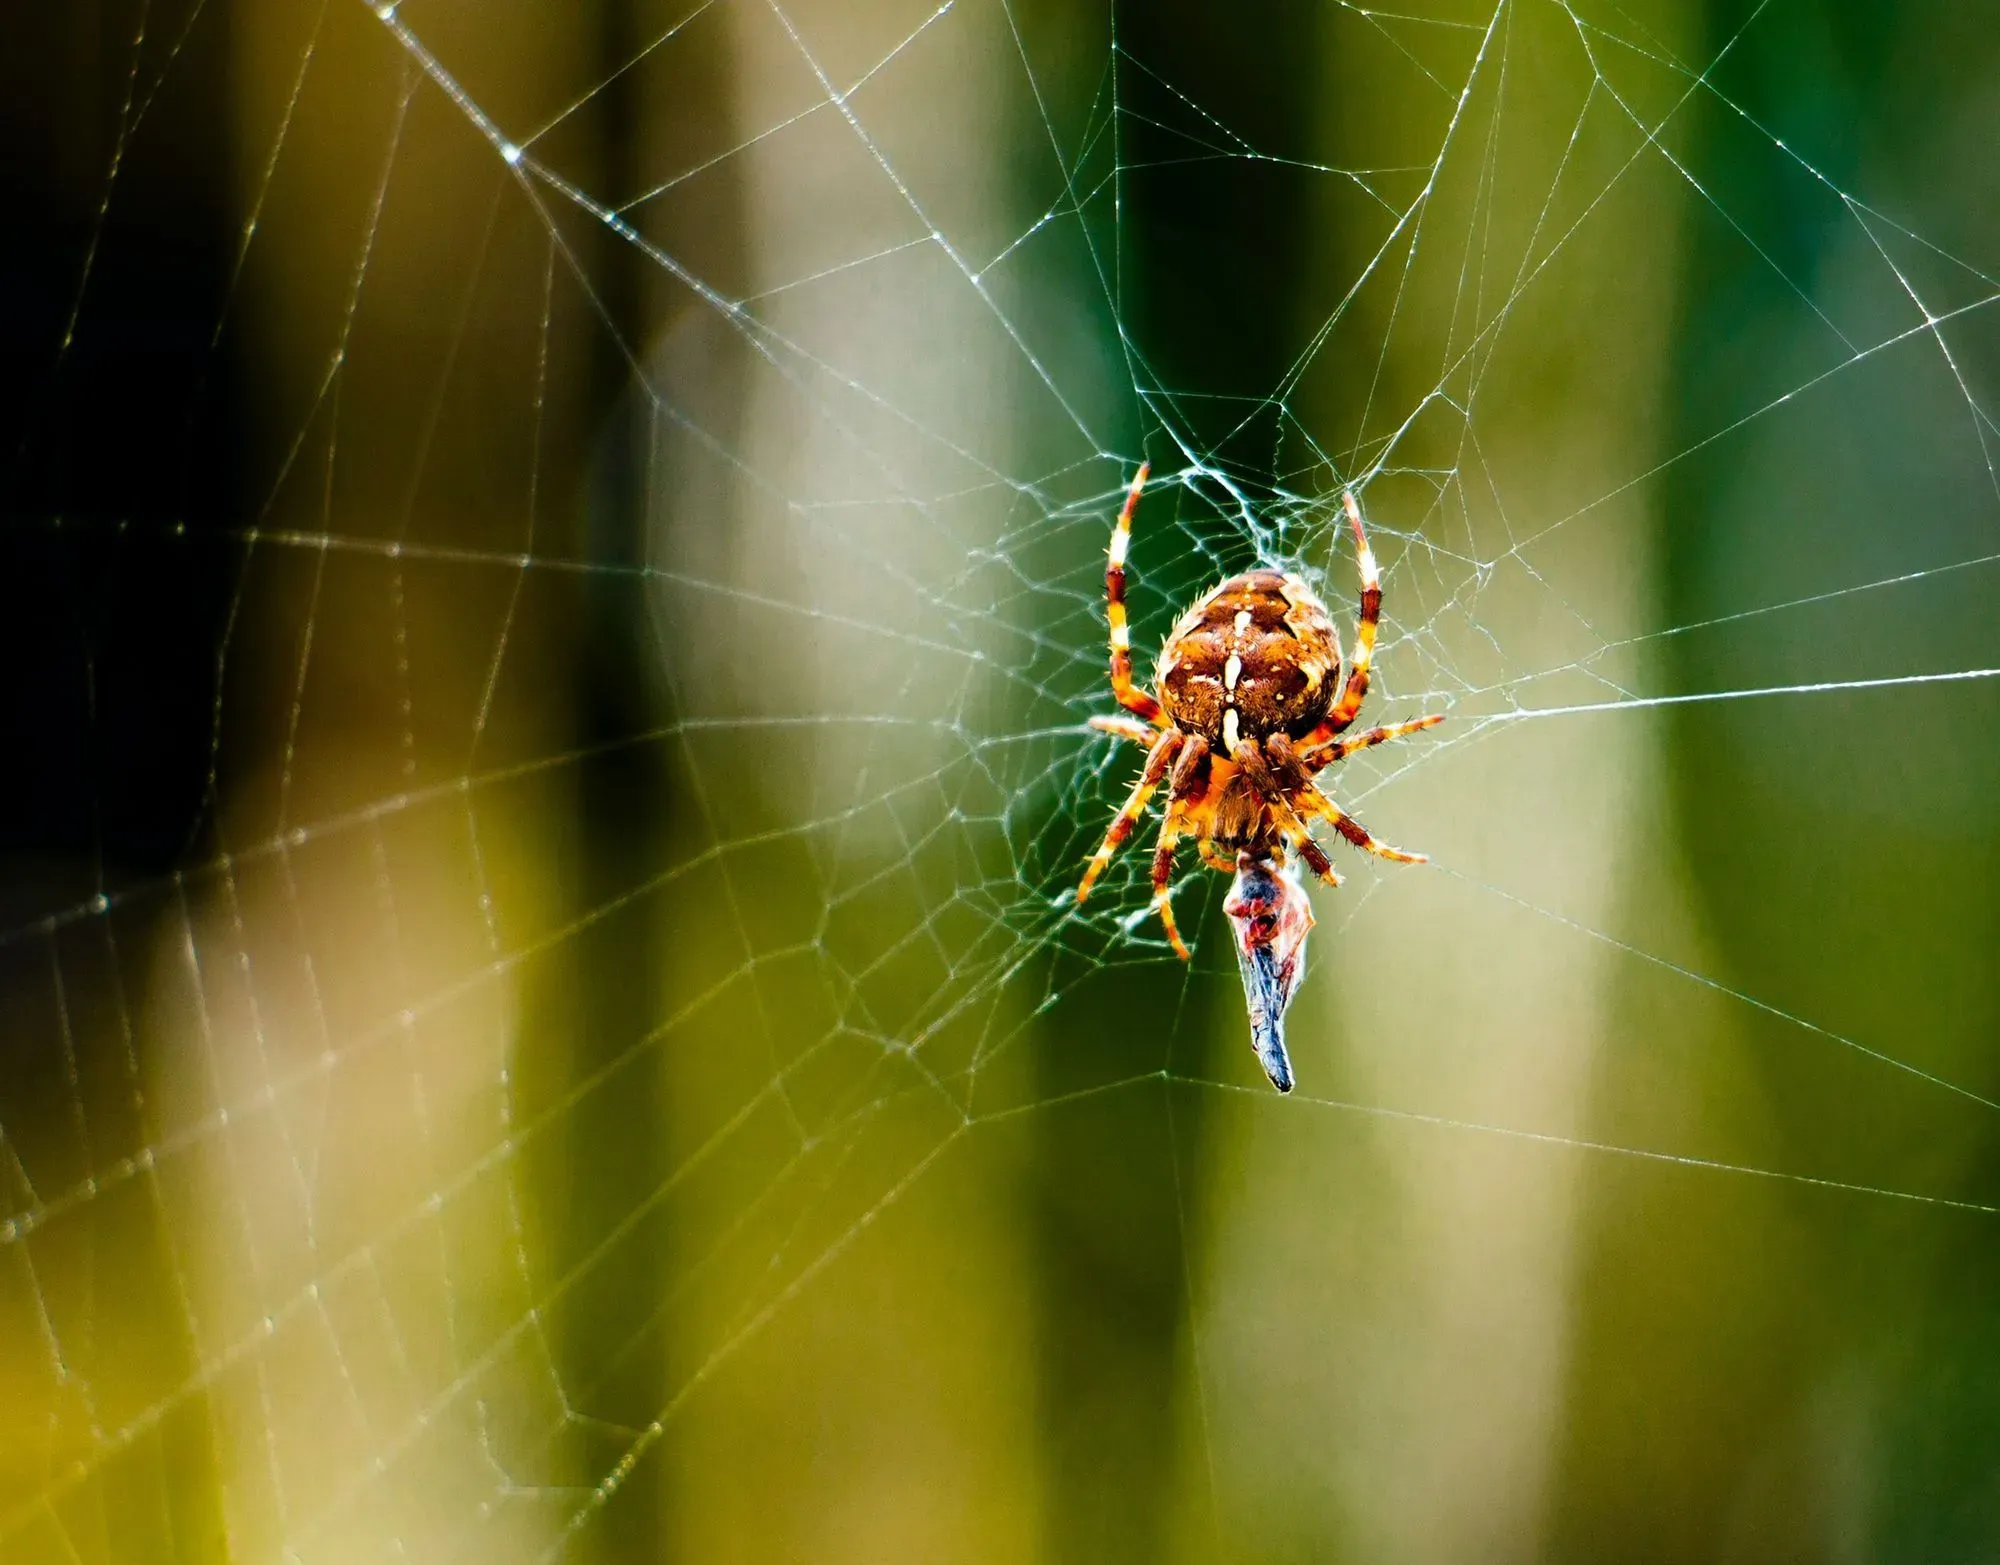 Learn interesting facts about spider behavior, like are spiders nocturnal?